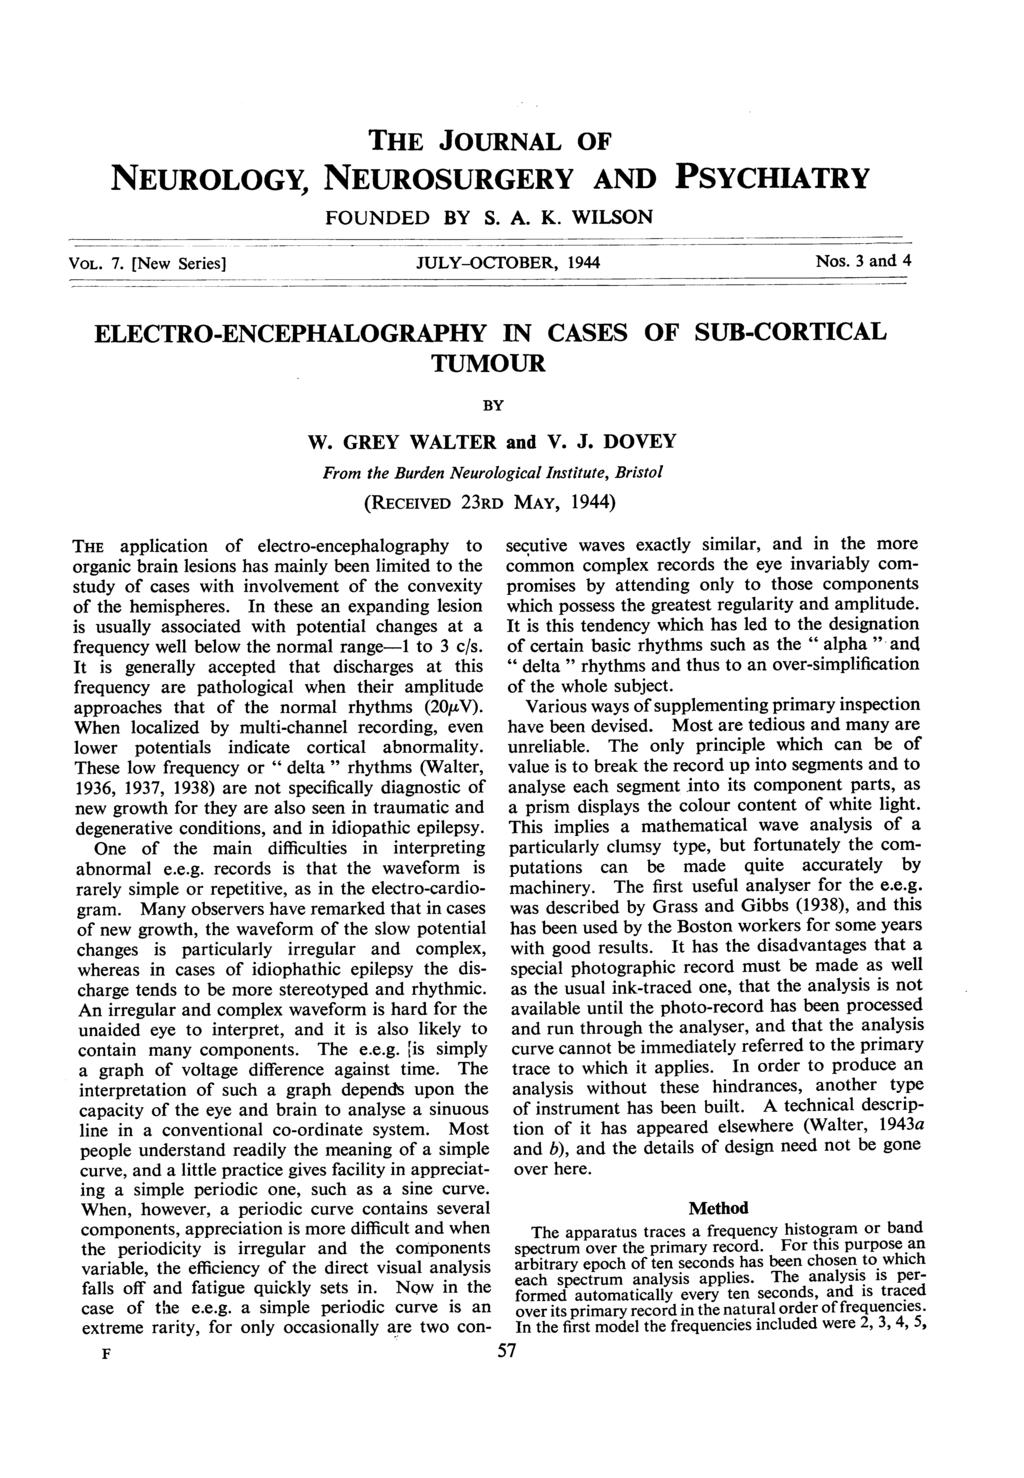 THE JOURNAL OF NEUROLOGY, NEUROSURGERY AND PSYCHIATRY FOUNDED BY S. A. K. WILSON VOL. 7. [New Series] JULY-OCTOBER, 1944 Nos. 3 and 4 ELECTRO-ENCEPHALOGRAPHY IN CASES OF SUB-CORTICAL TUMOUR BY W.